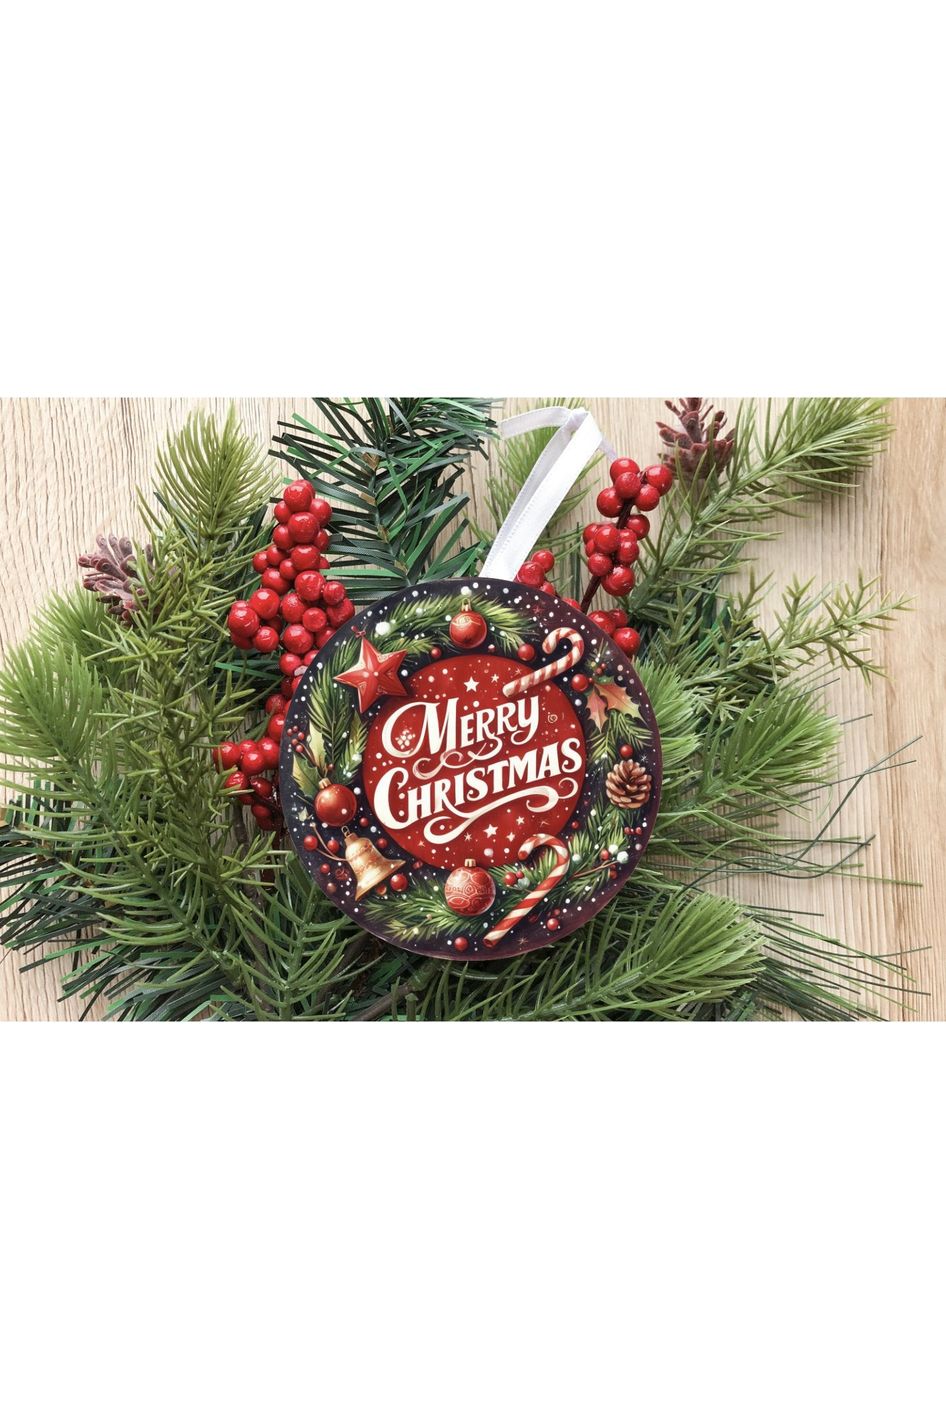 Shop For Merry Christmas Candy Cane Sign - Wreath Enhancement